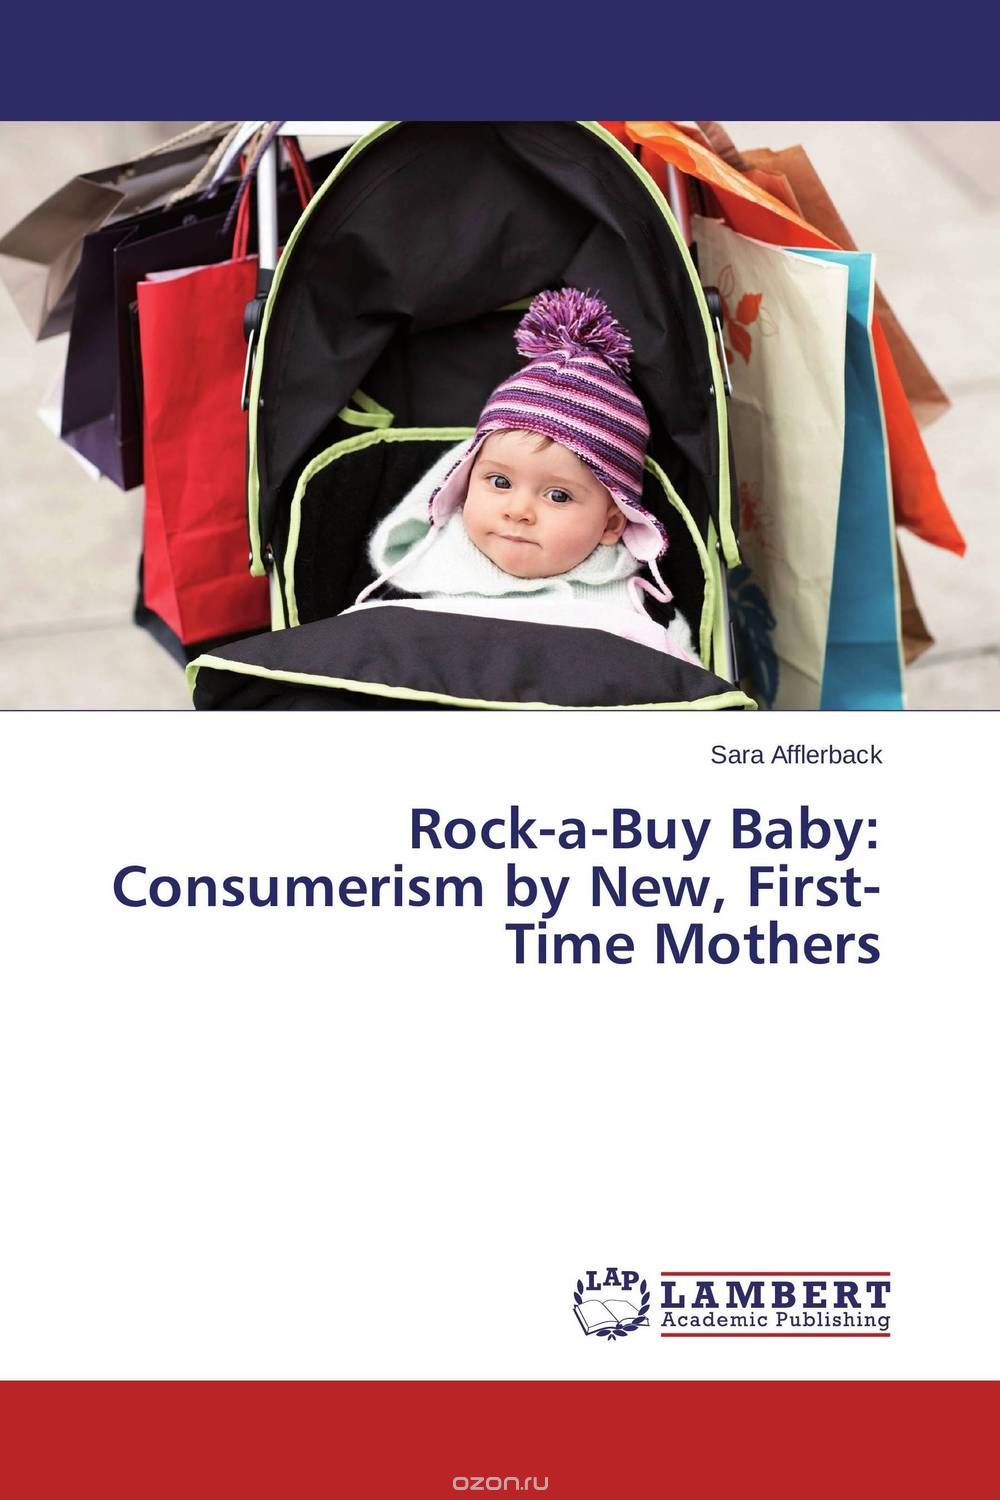 Скачать книгу "Rock-a-Buy Baby: Consumerism by New, First-Time Mothers"